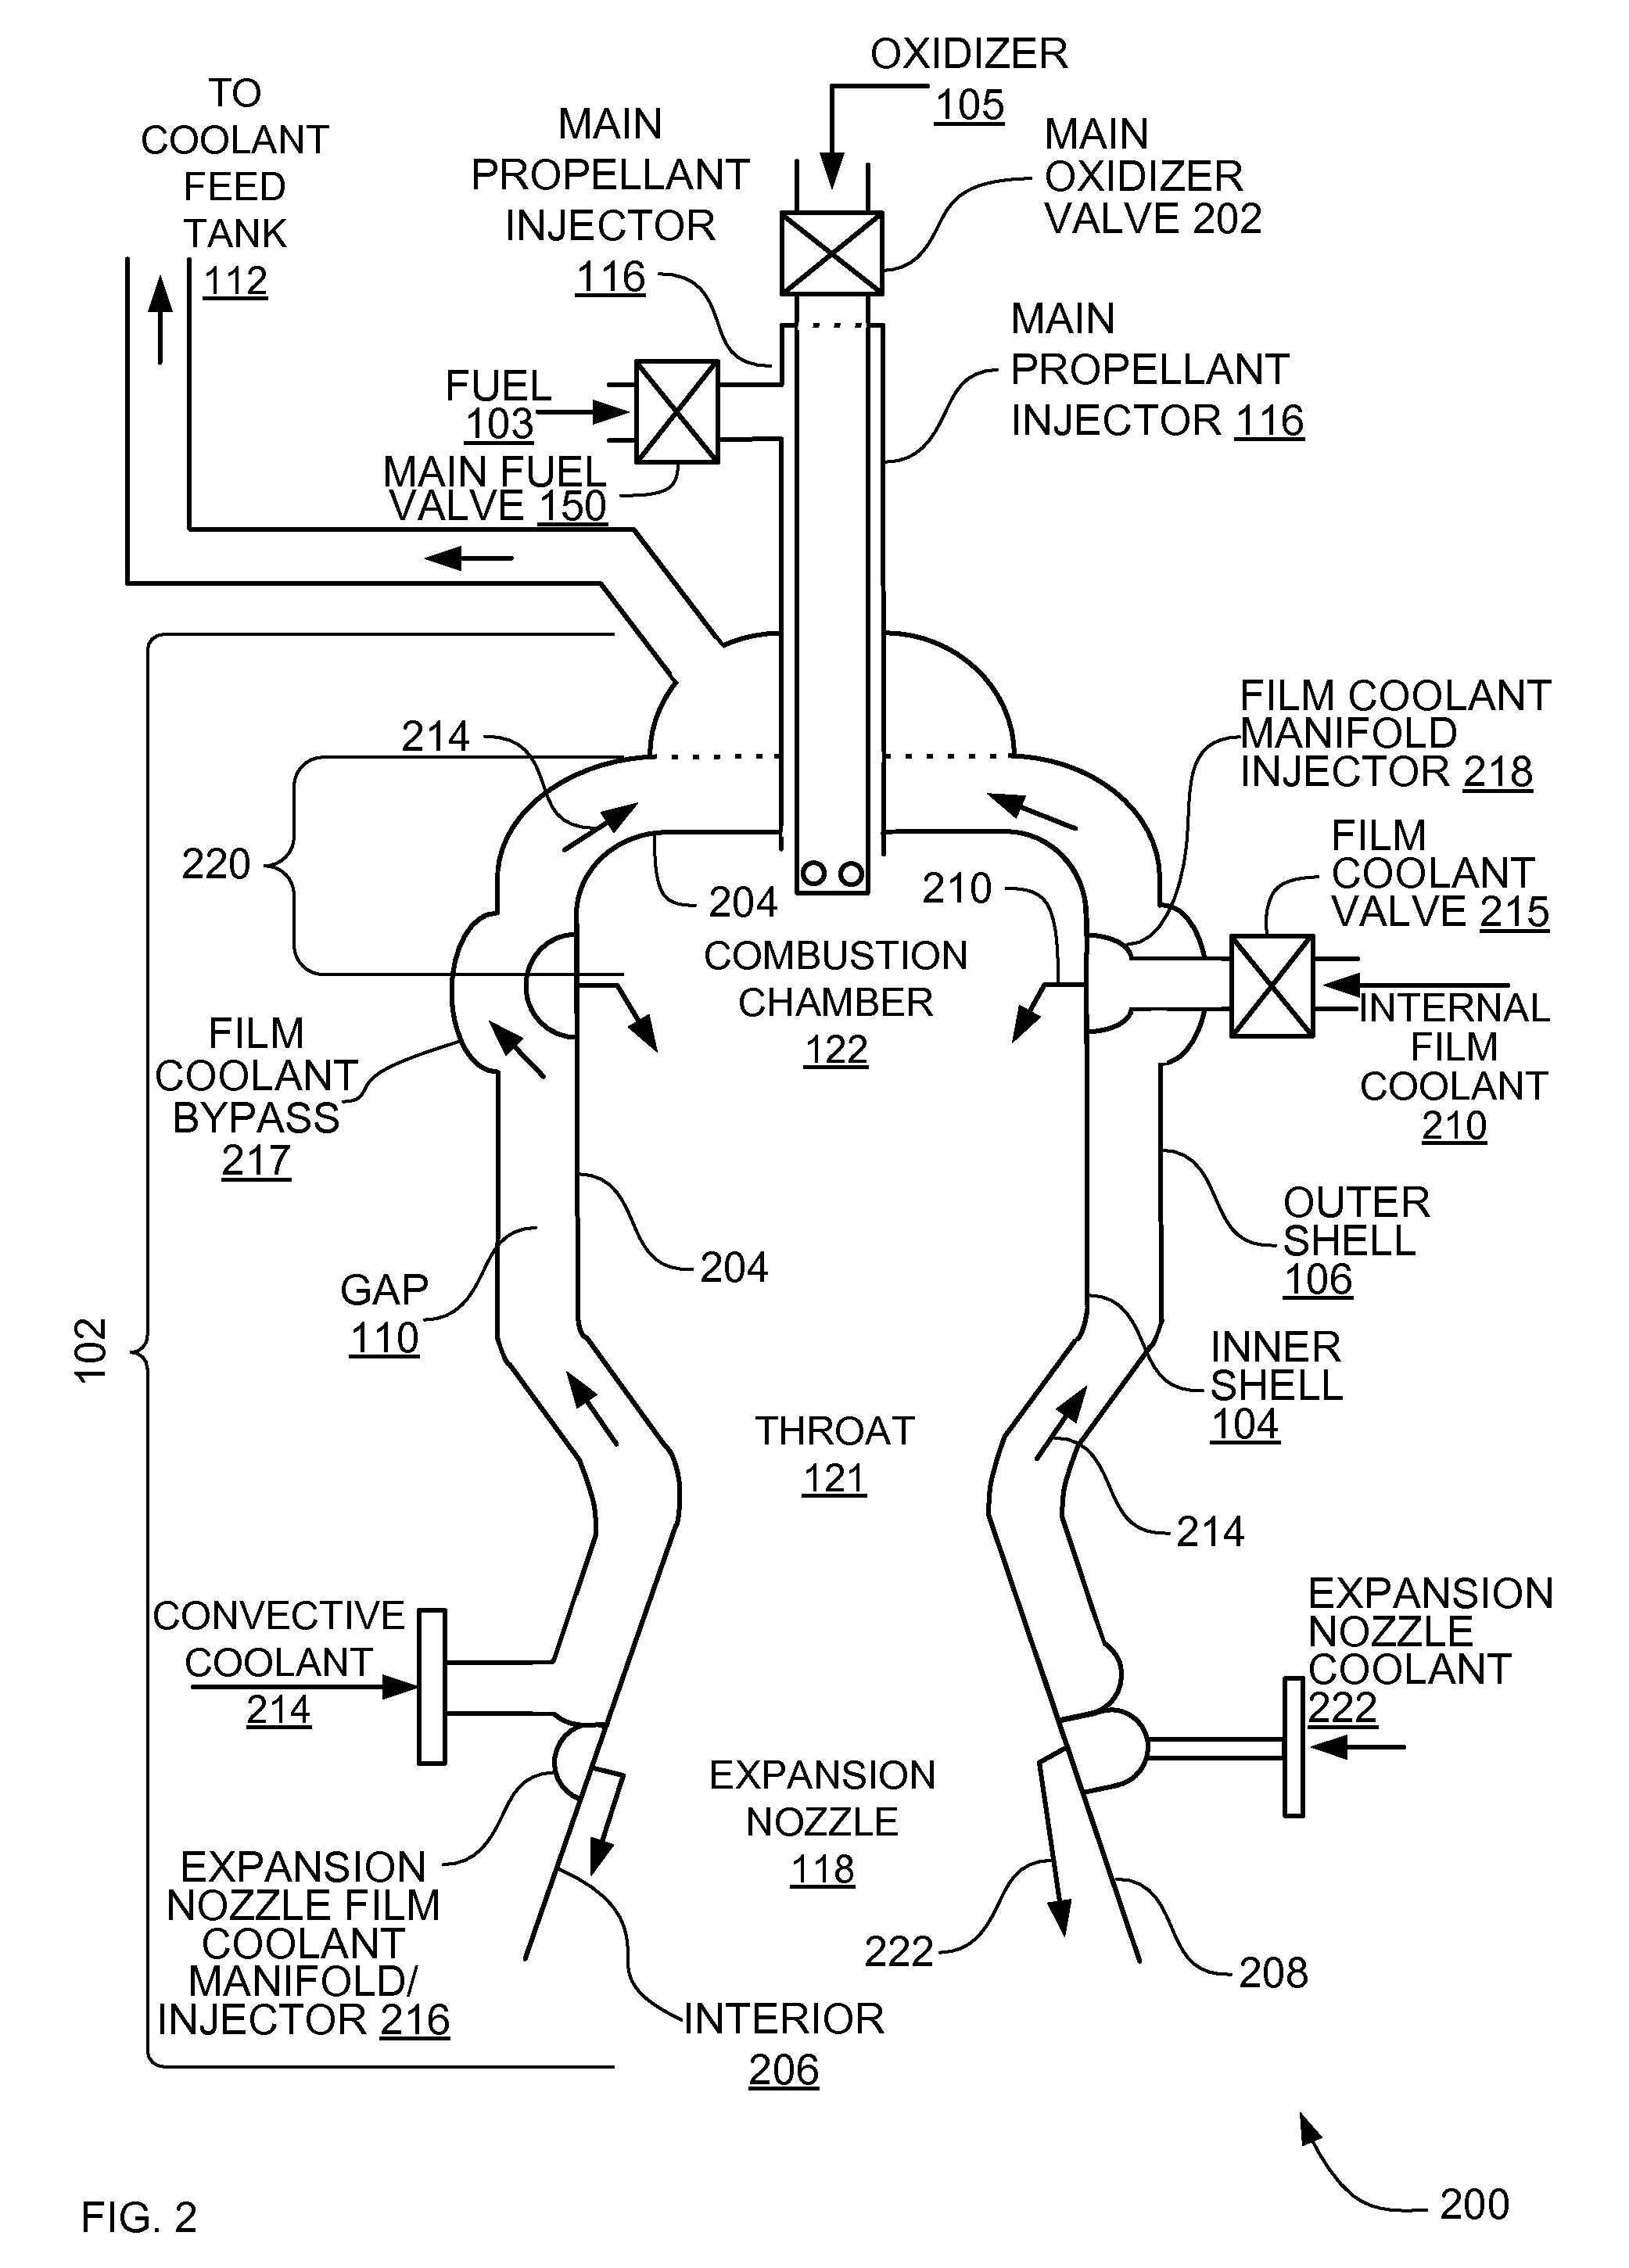 Simplified thrust chamber recirculating cooling system